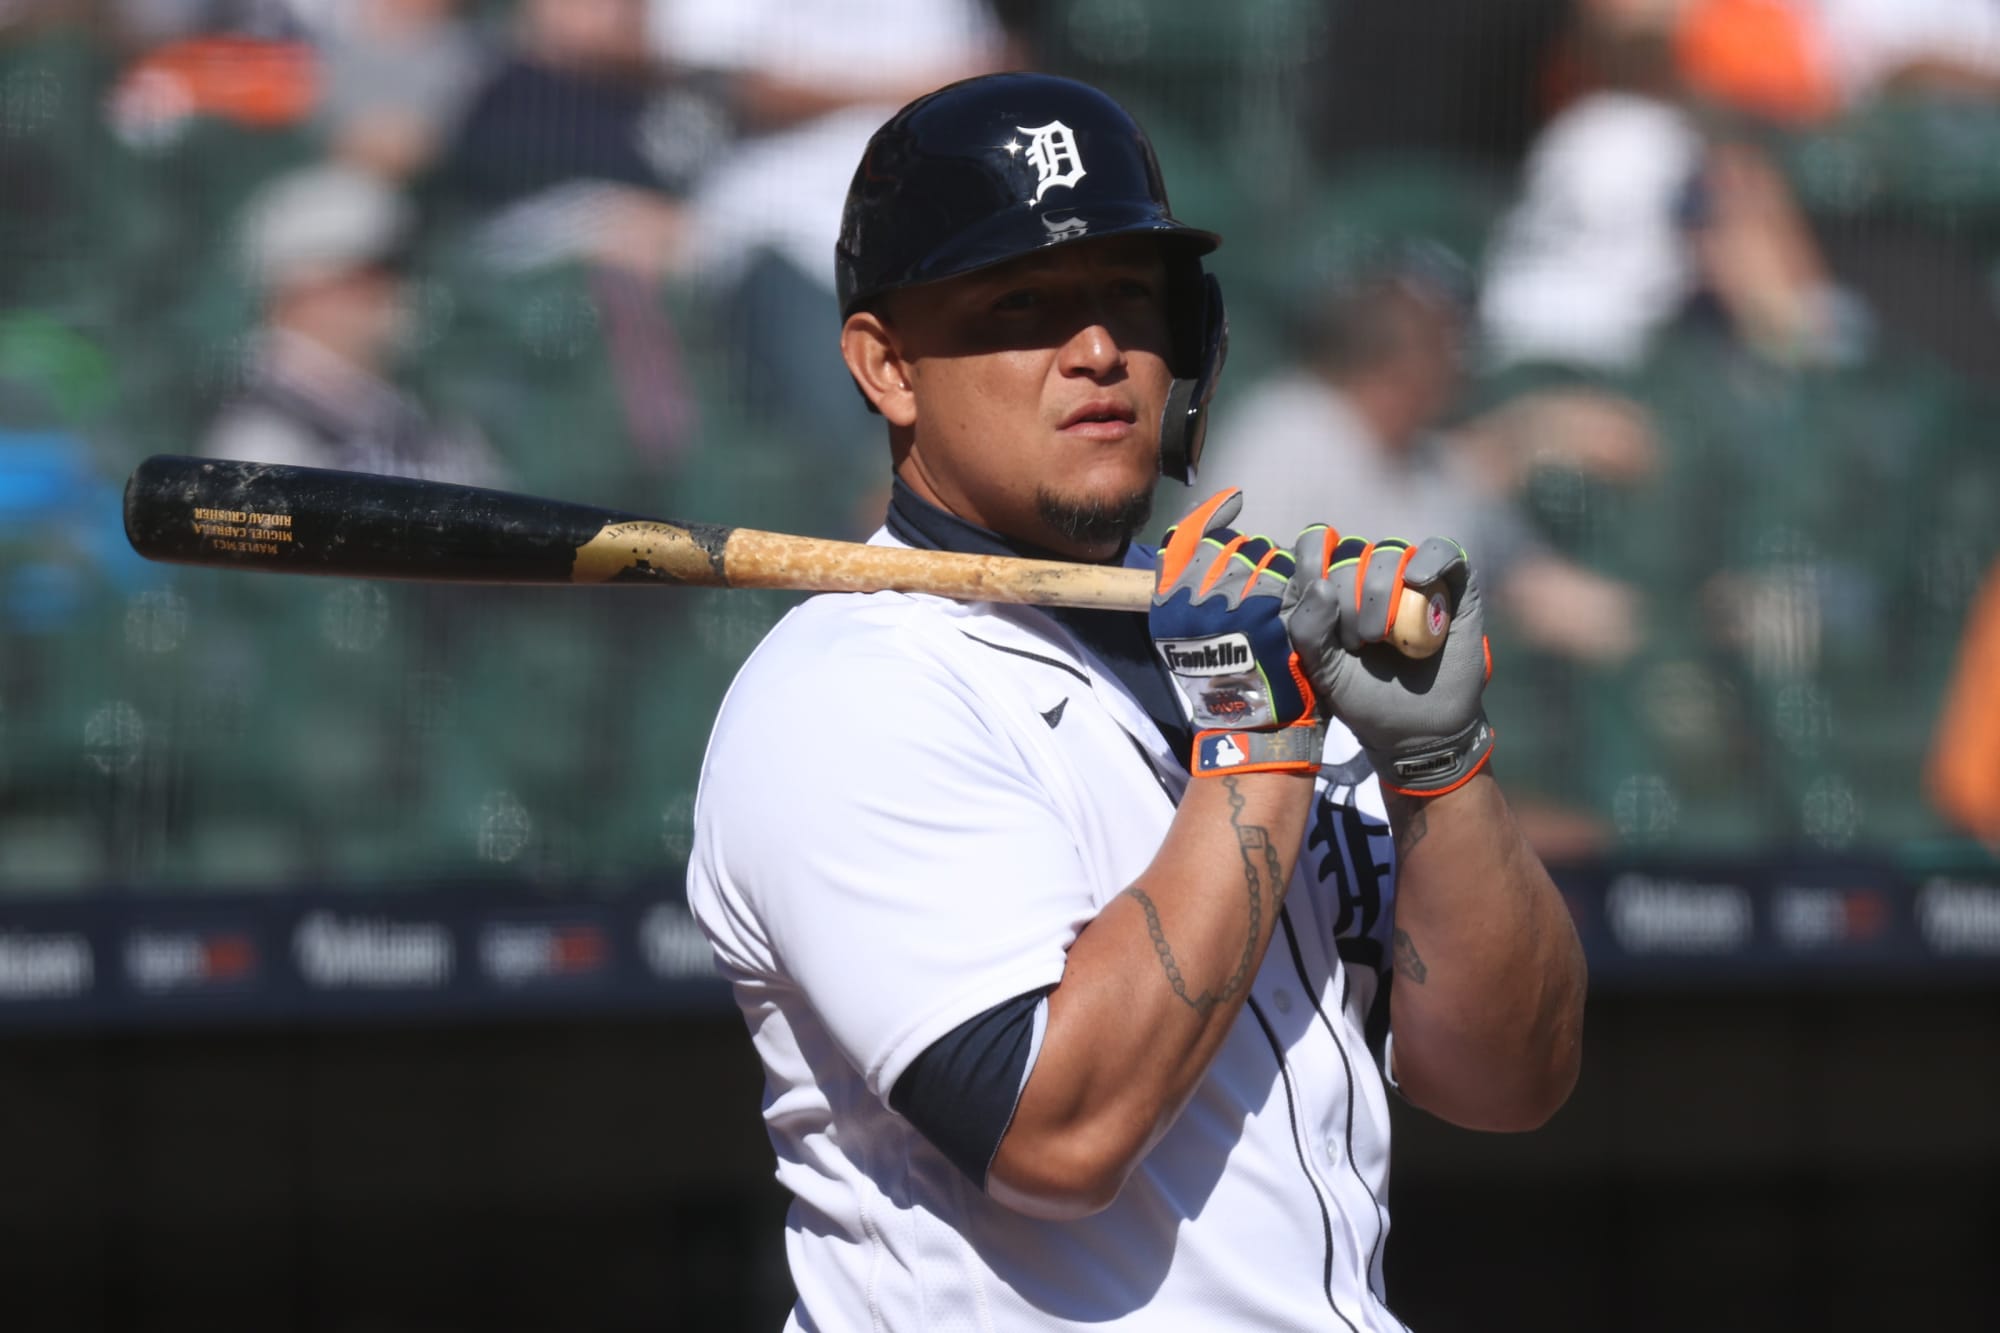 Miguel Cabrera is one of the best hitters of his generation and